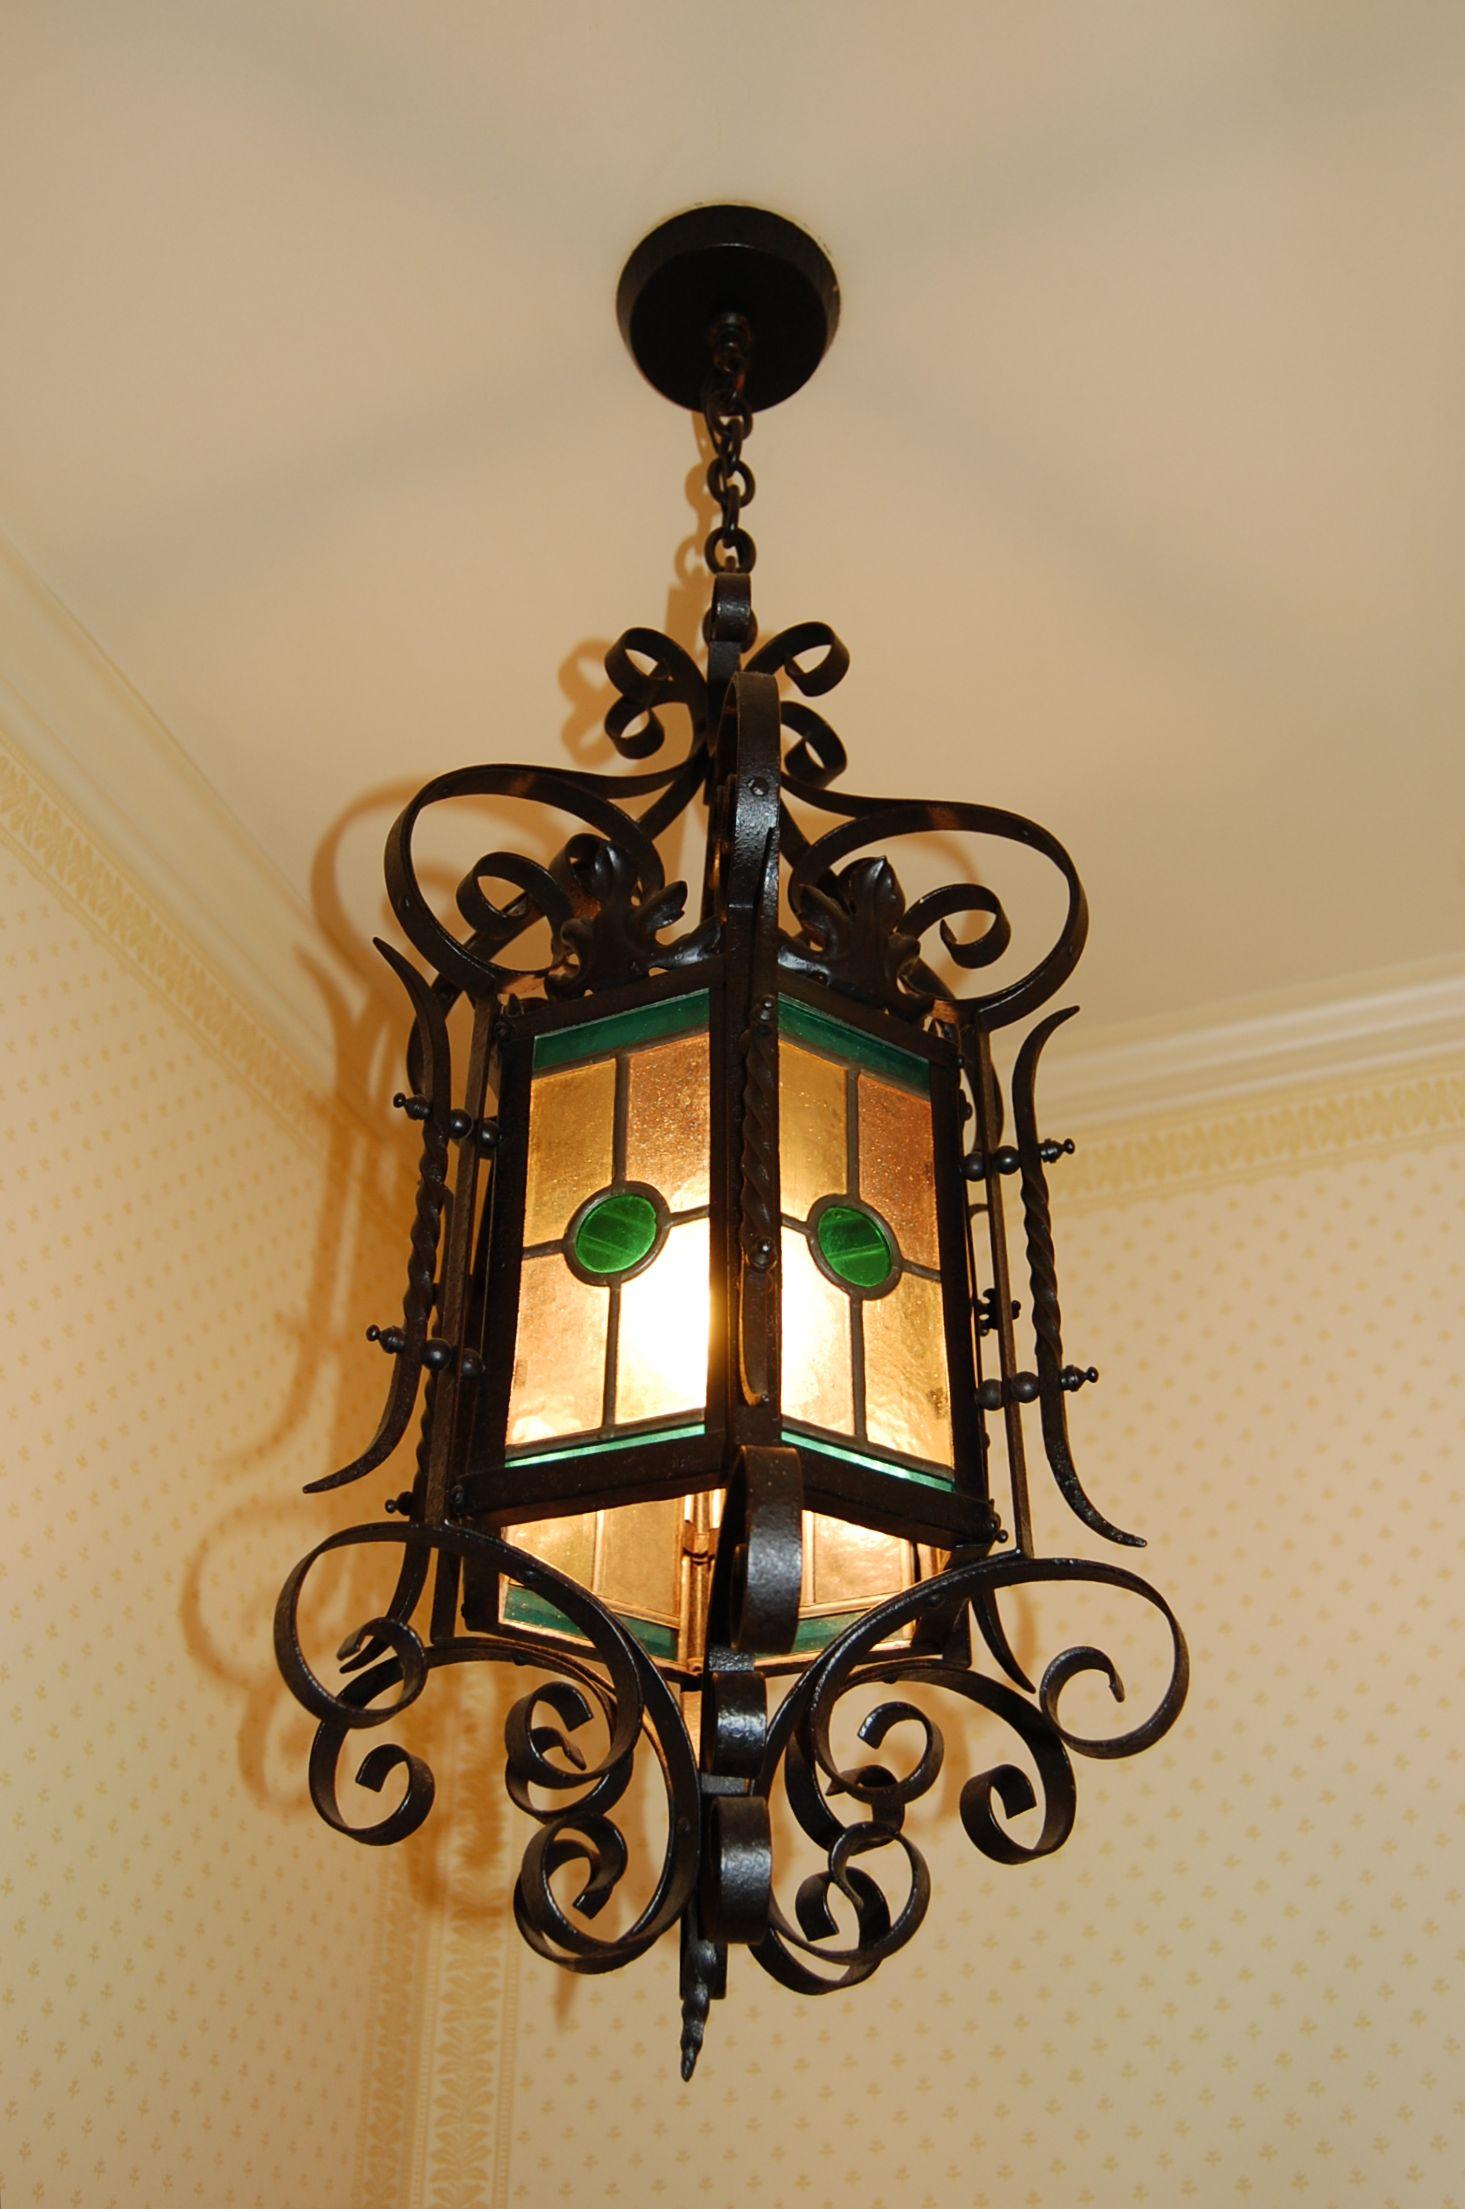 Hanging lantern with twisted iron details, scrolls and metal Acanthus leaf details. There are four panels of glass which include clear, aqua and a simulated Malachite glass center dot. The overall length including the chain is 40